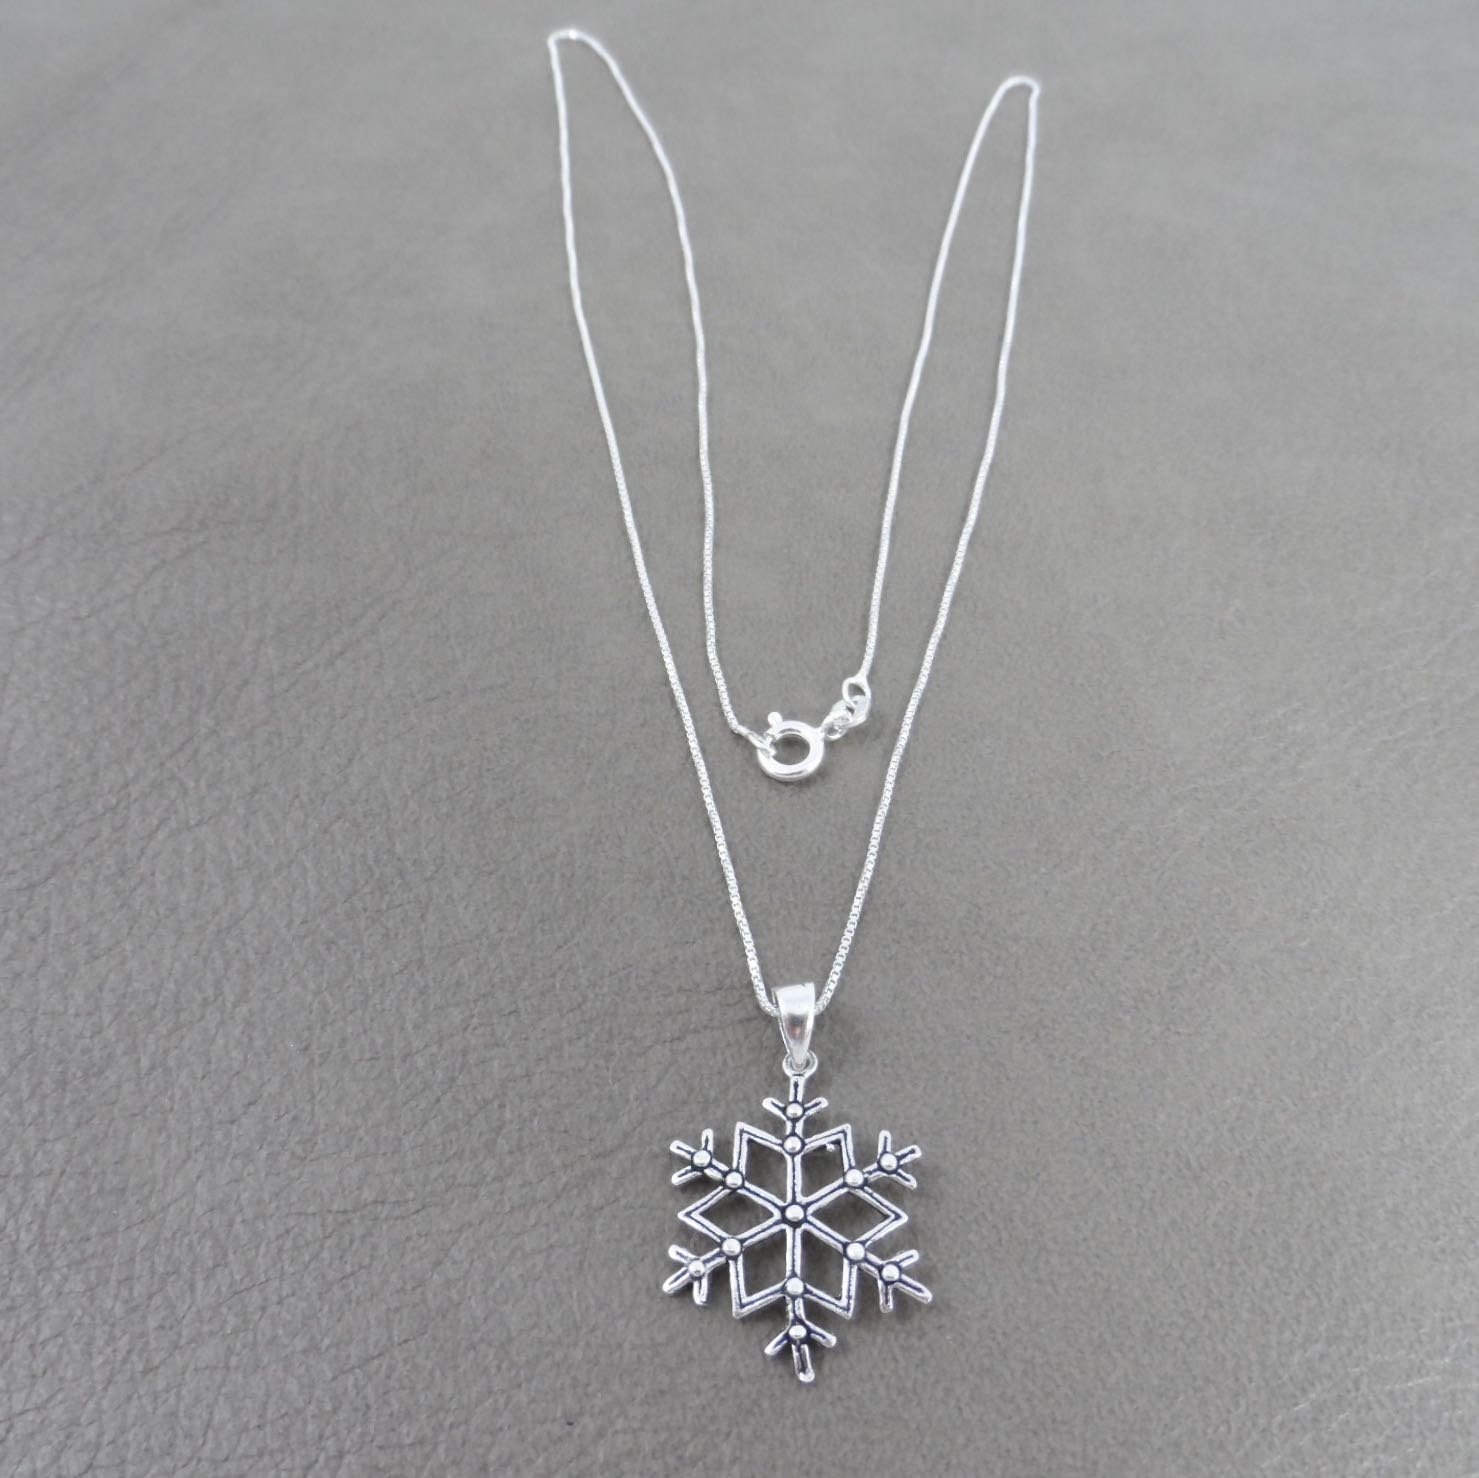 Snowflake Necklace in Sterling Silver Snowflake Necklace | Etsy